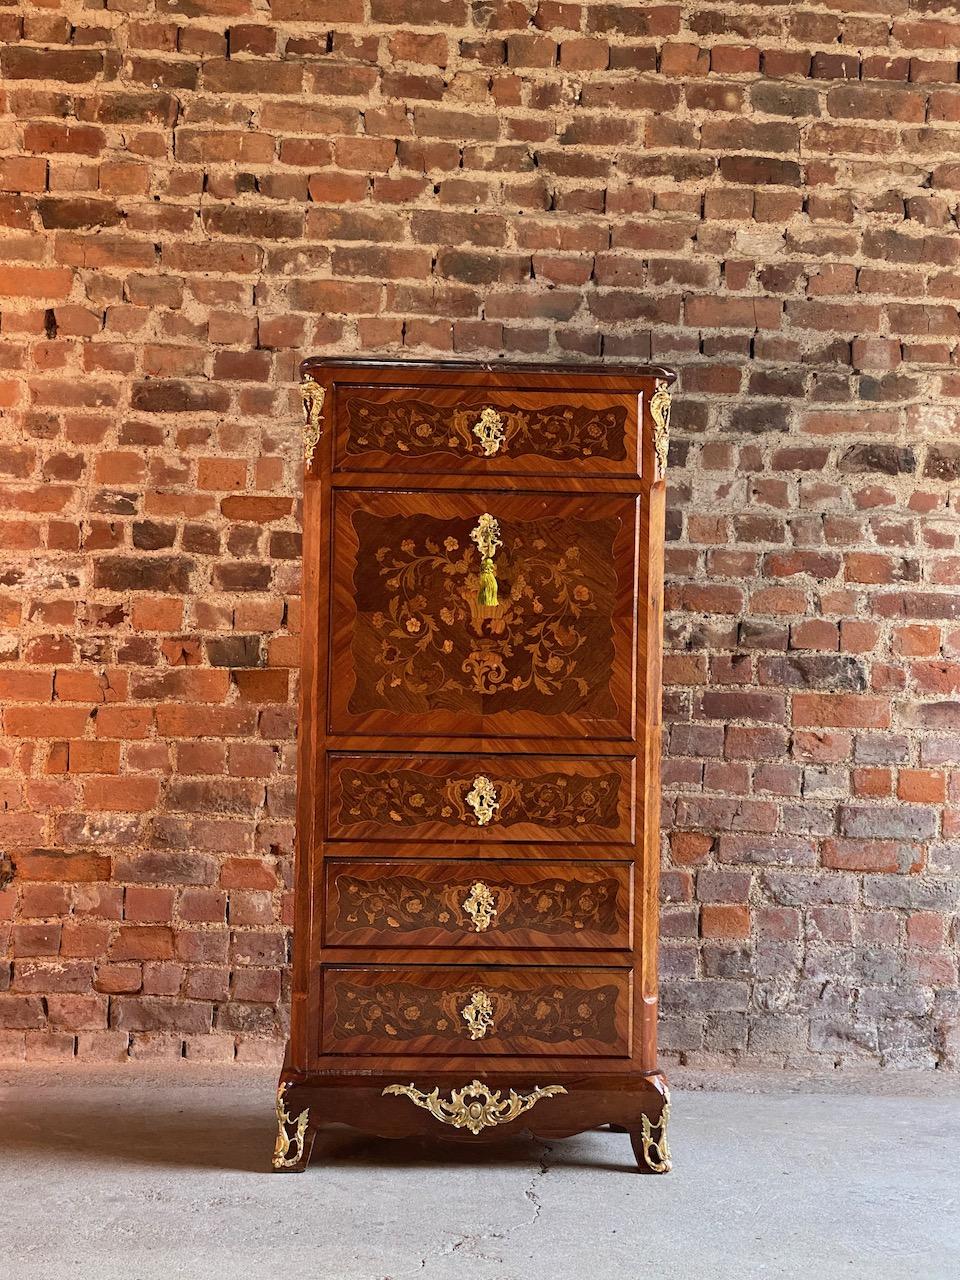 
Antique French Kingwood & Mahogany Secretaire Abbatant 19th century Napoleon III circa 1870

A magnificent late19th century Napoleon III Kingwood and Mahogany Marble topped Secretaire Abbatant France circa 1870, the rectangular red marble top